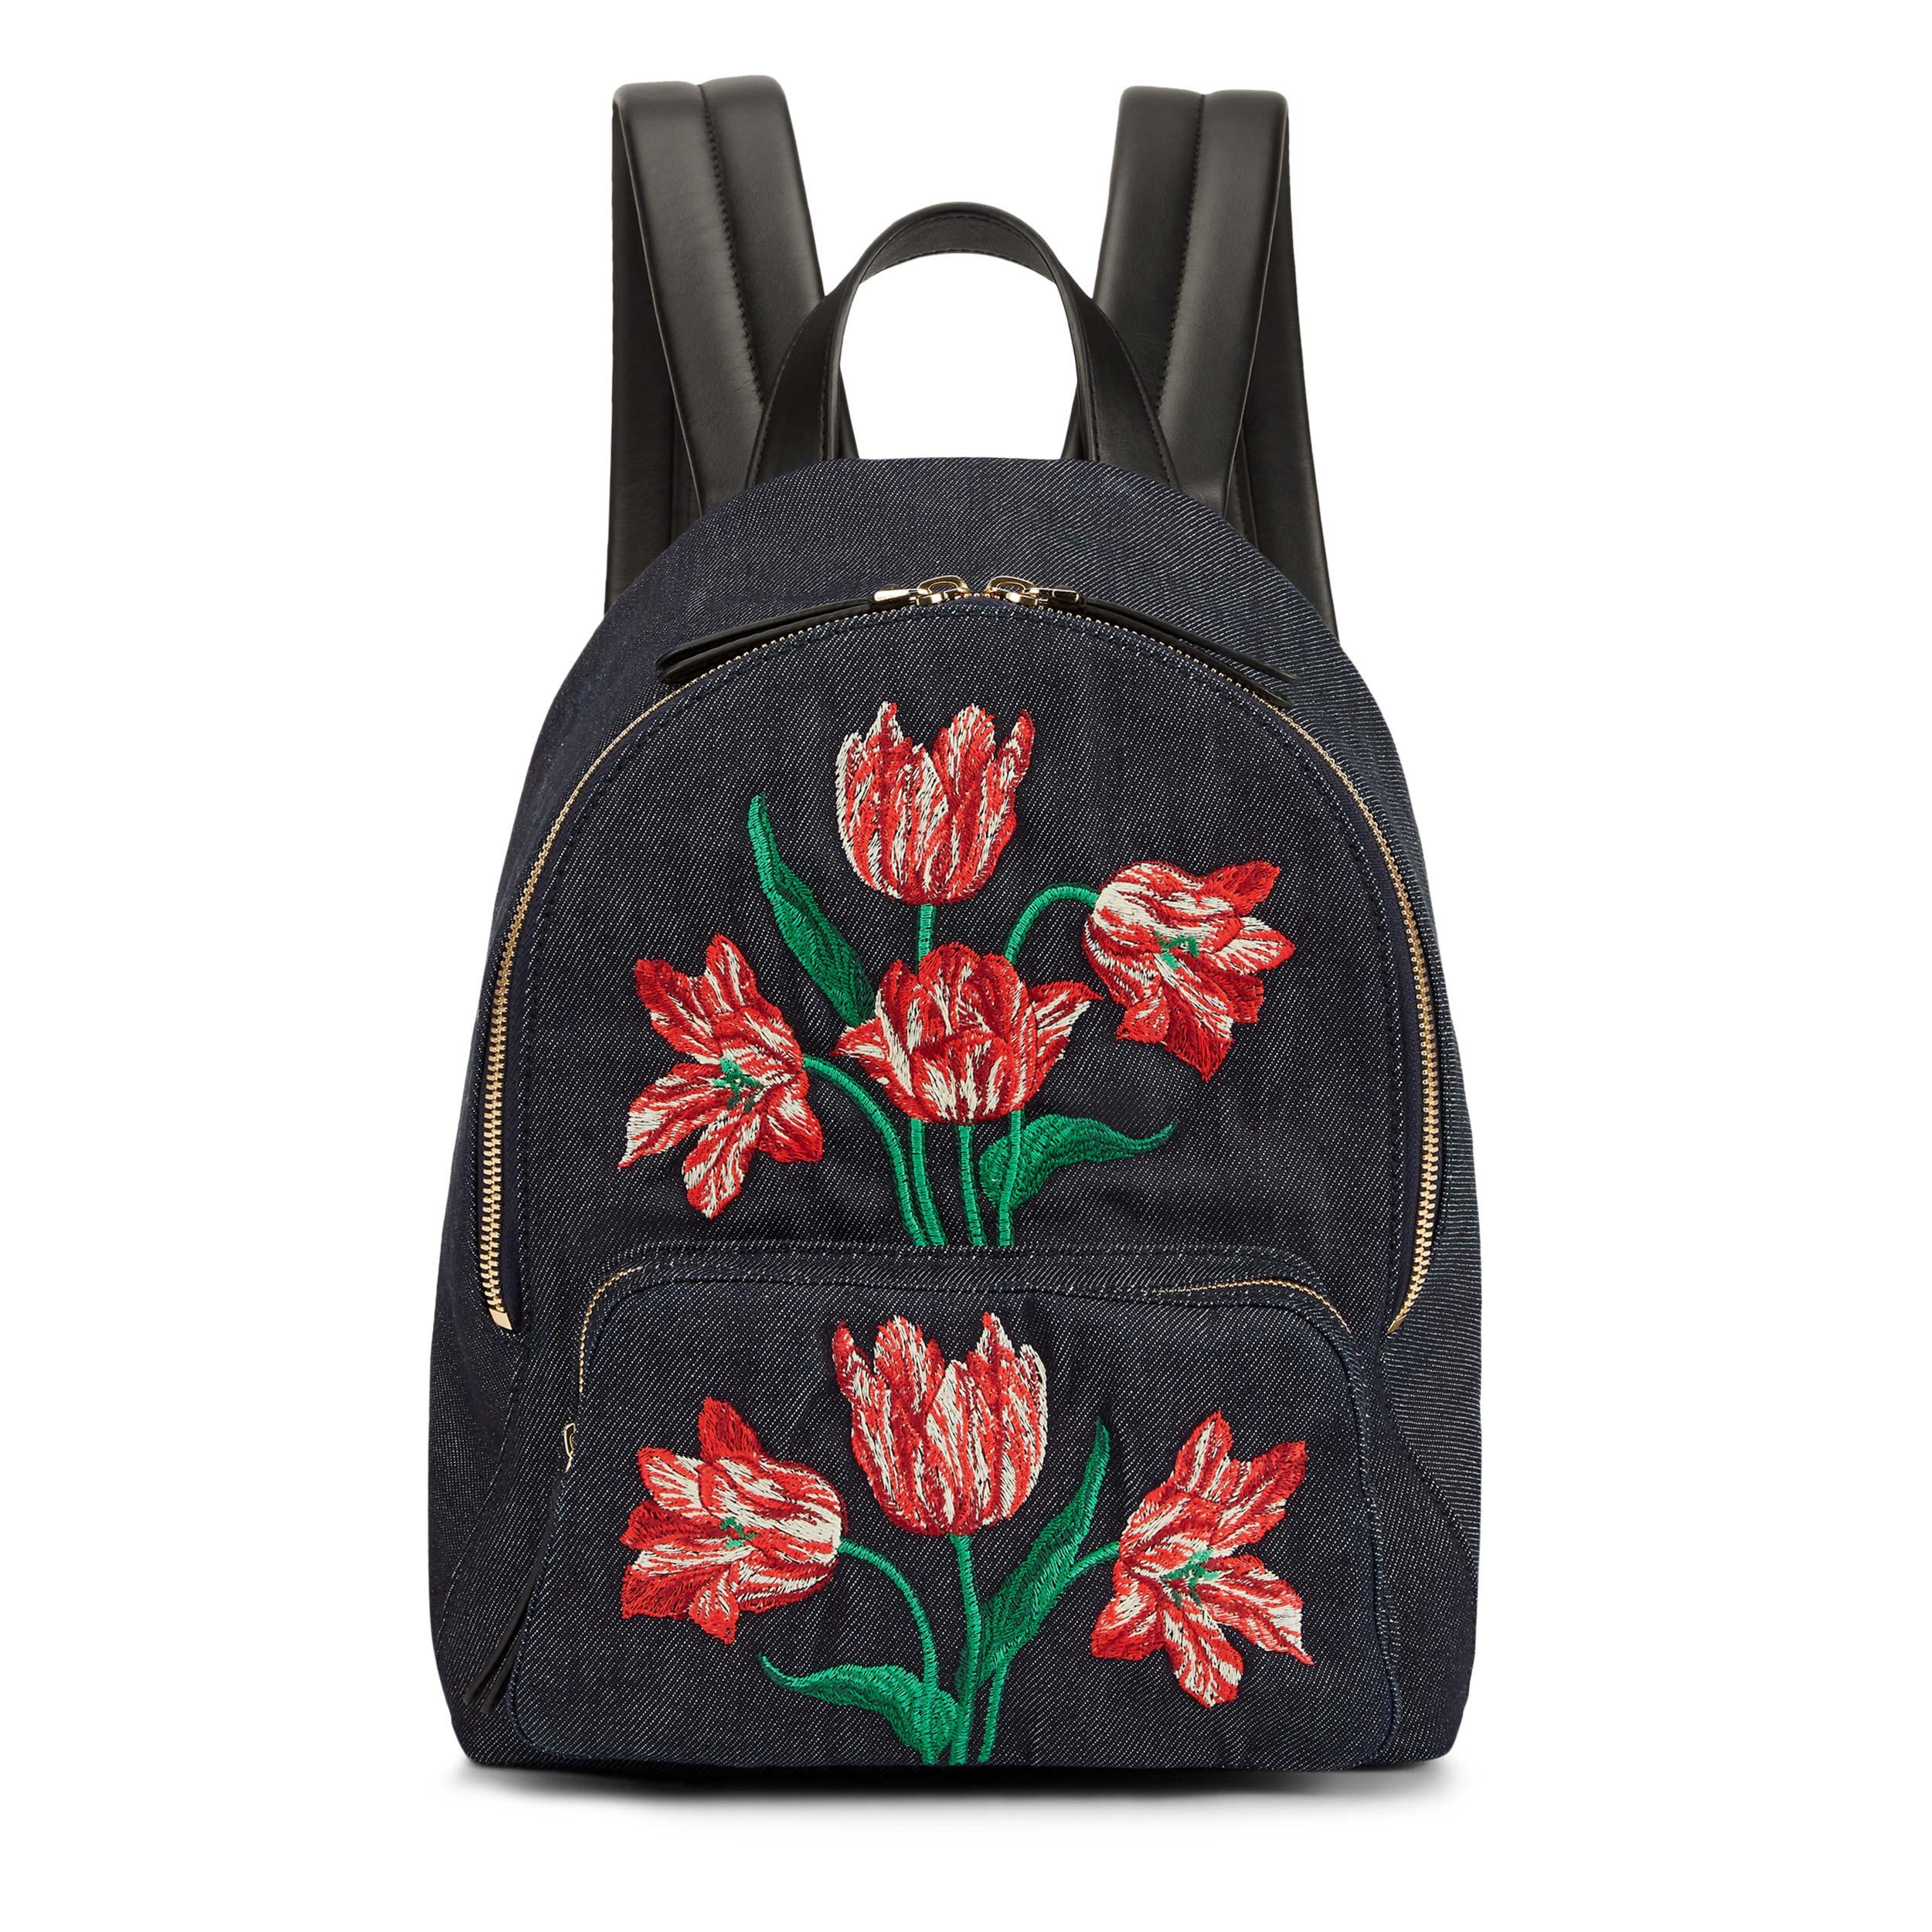 Sustainable Denim Designer Backpack - A blend of London's style and Italian craftsmanship.